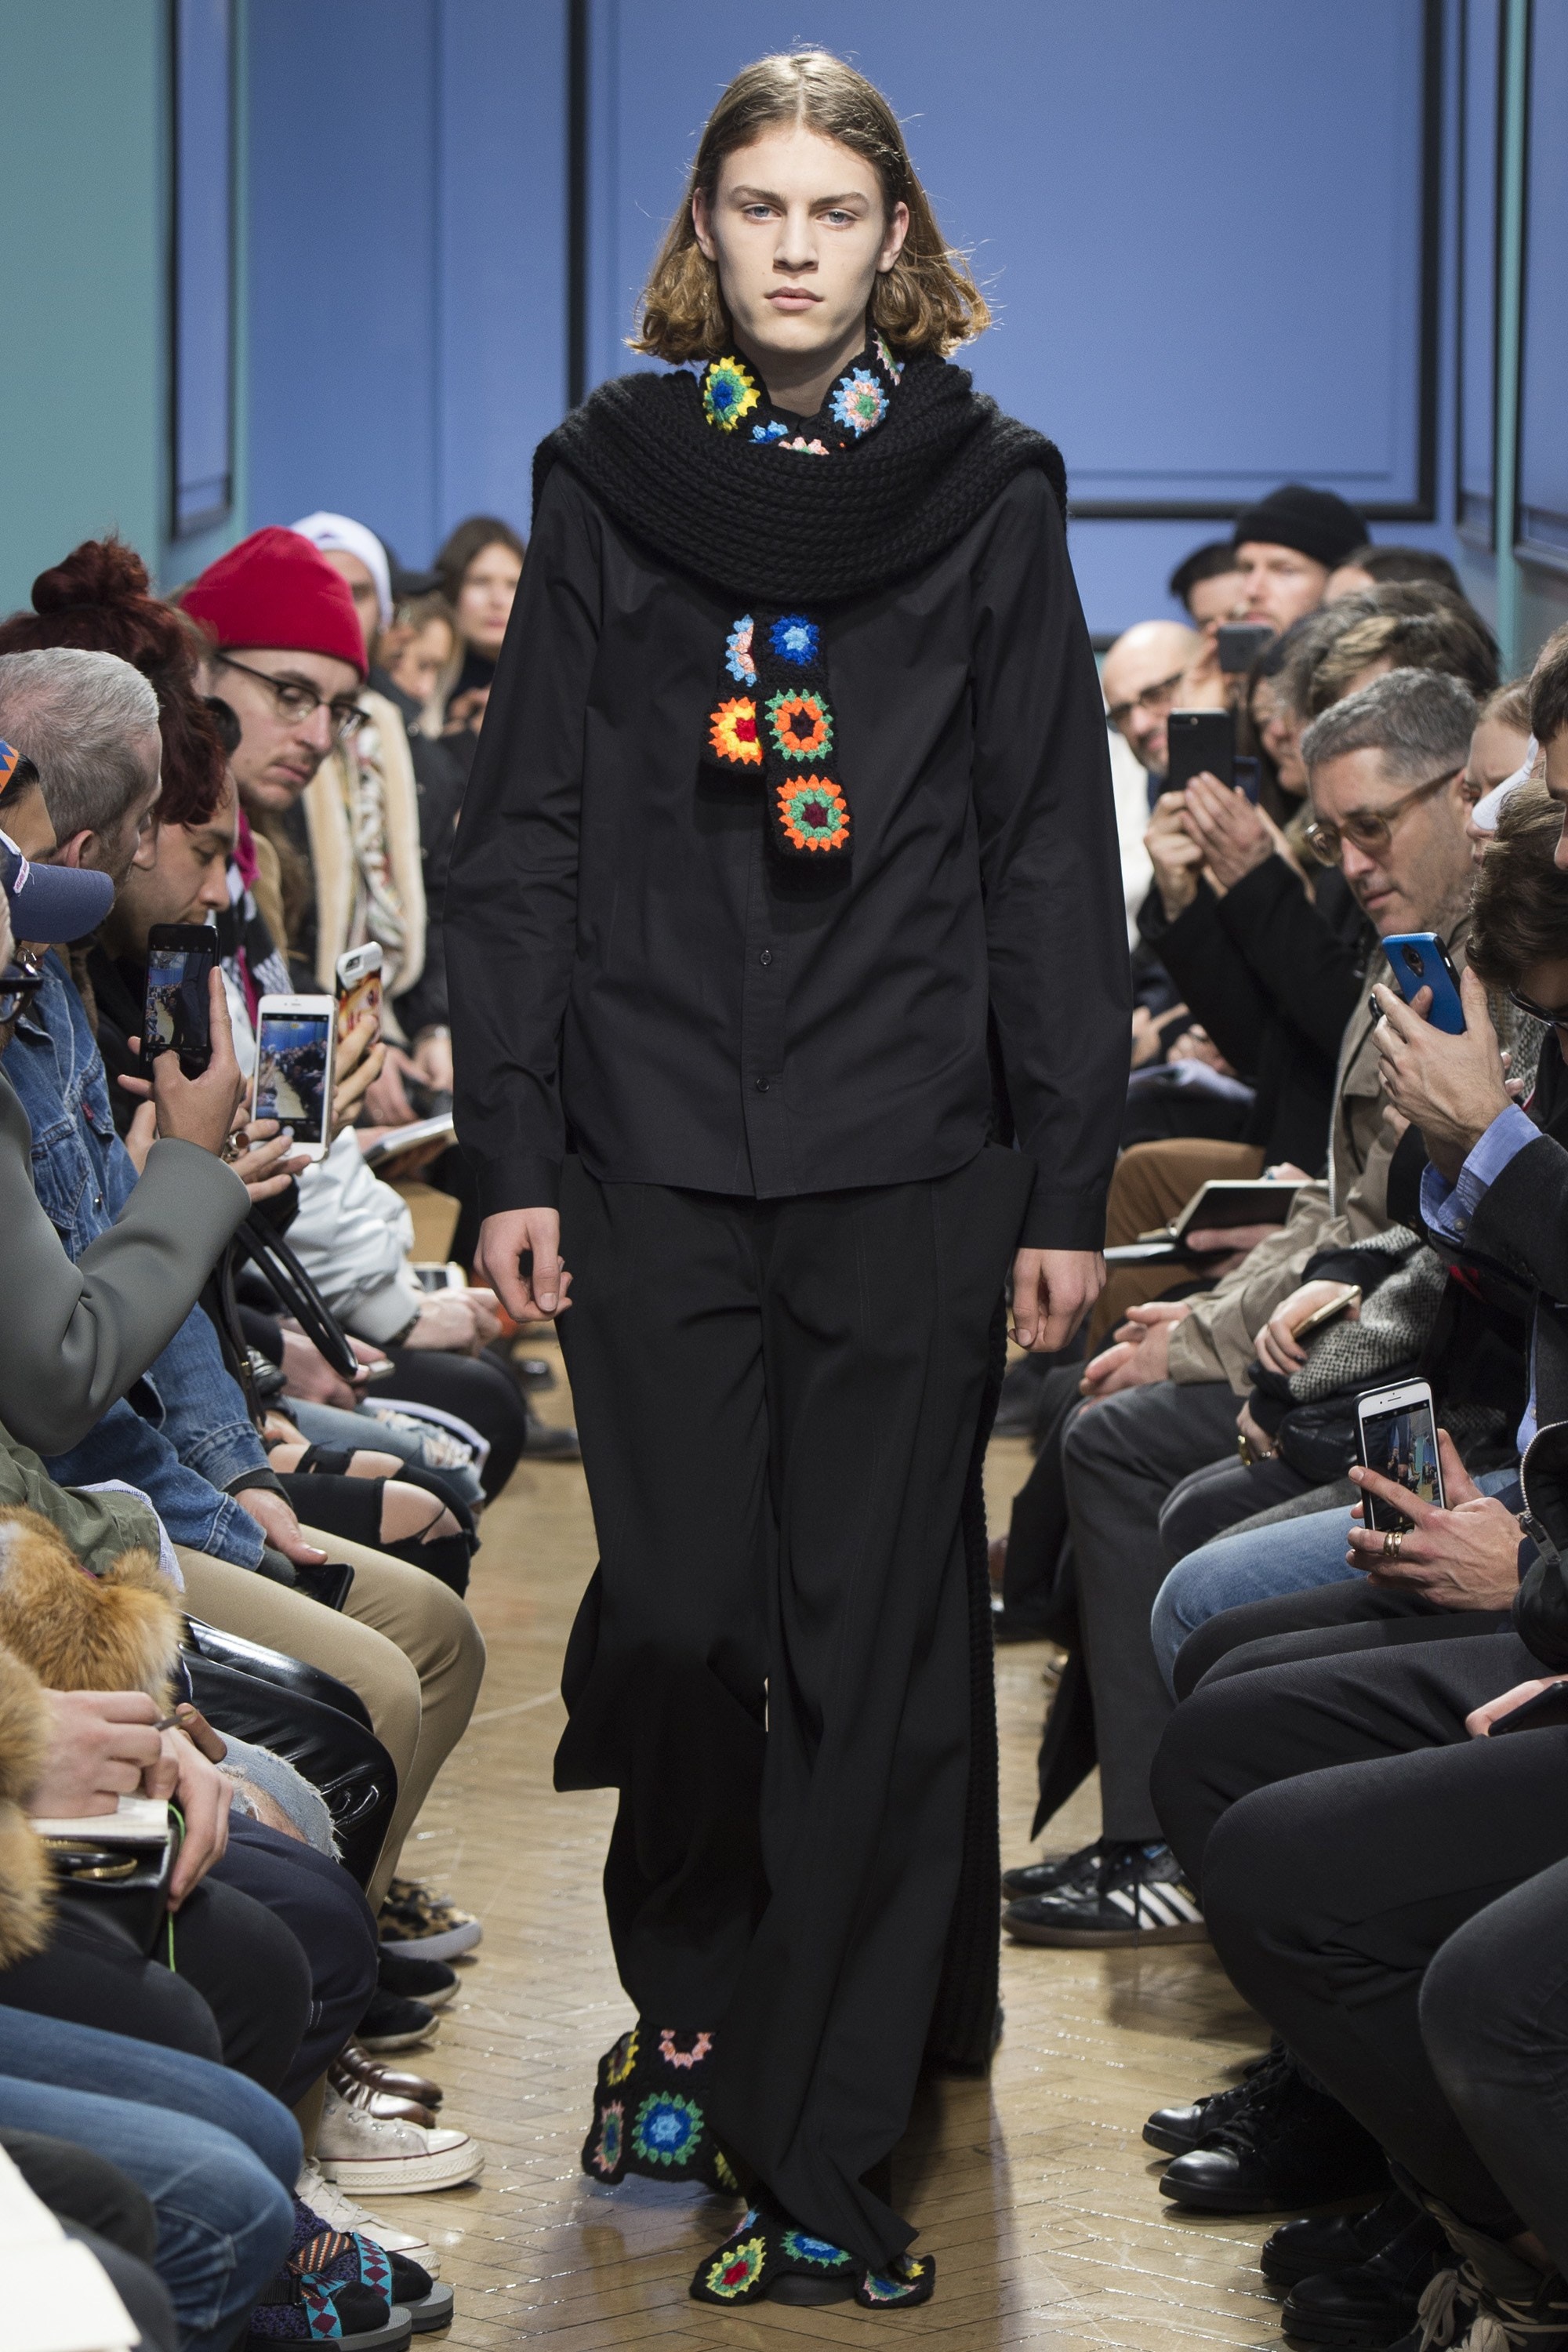 JW Anderson 2017 Fall/Winter Collection Runway Show London Fashion Week Men's